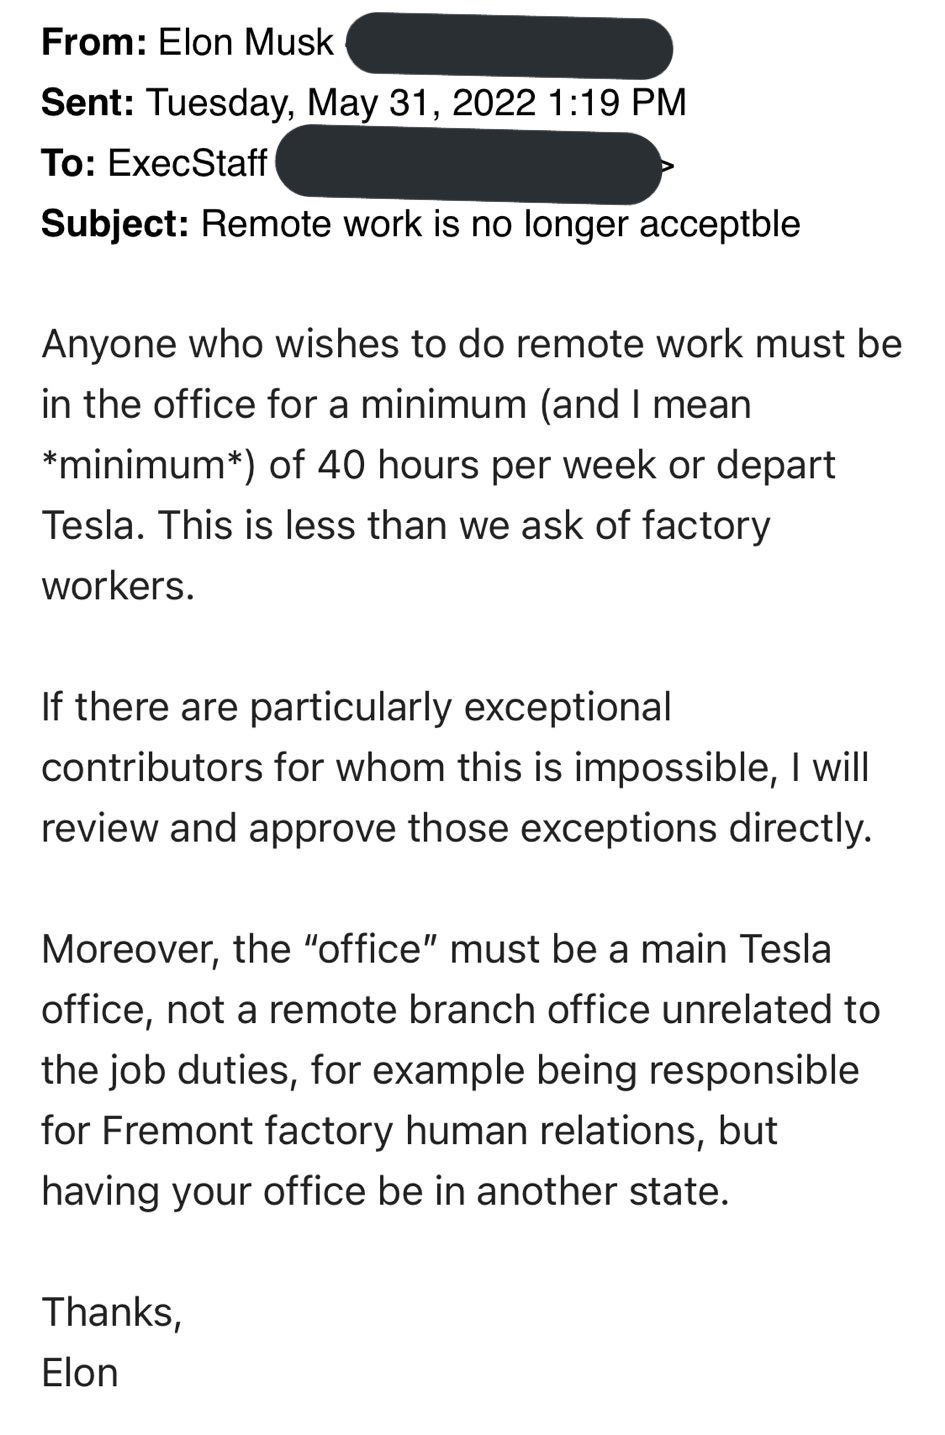 Elon Musk to Tesla executives: go to the office or quit